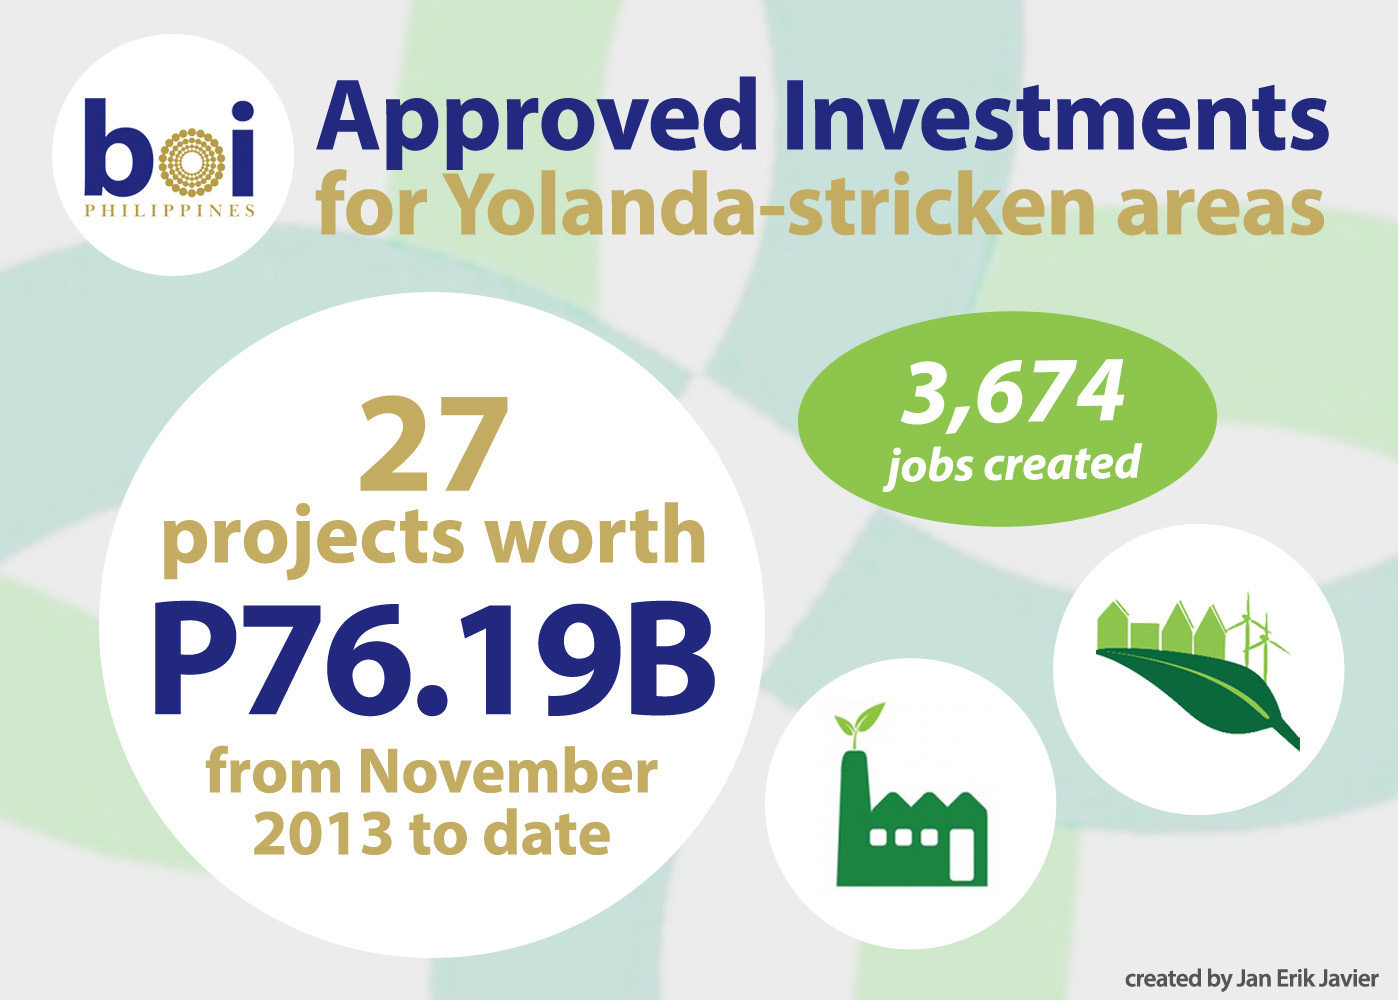 infographic on BOI-approved investments for Yolanda-stricken areas